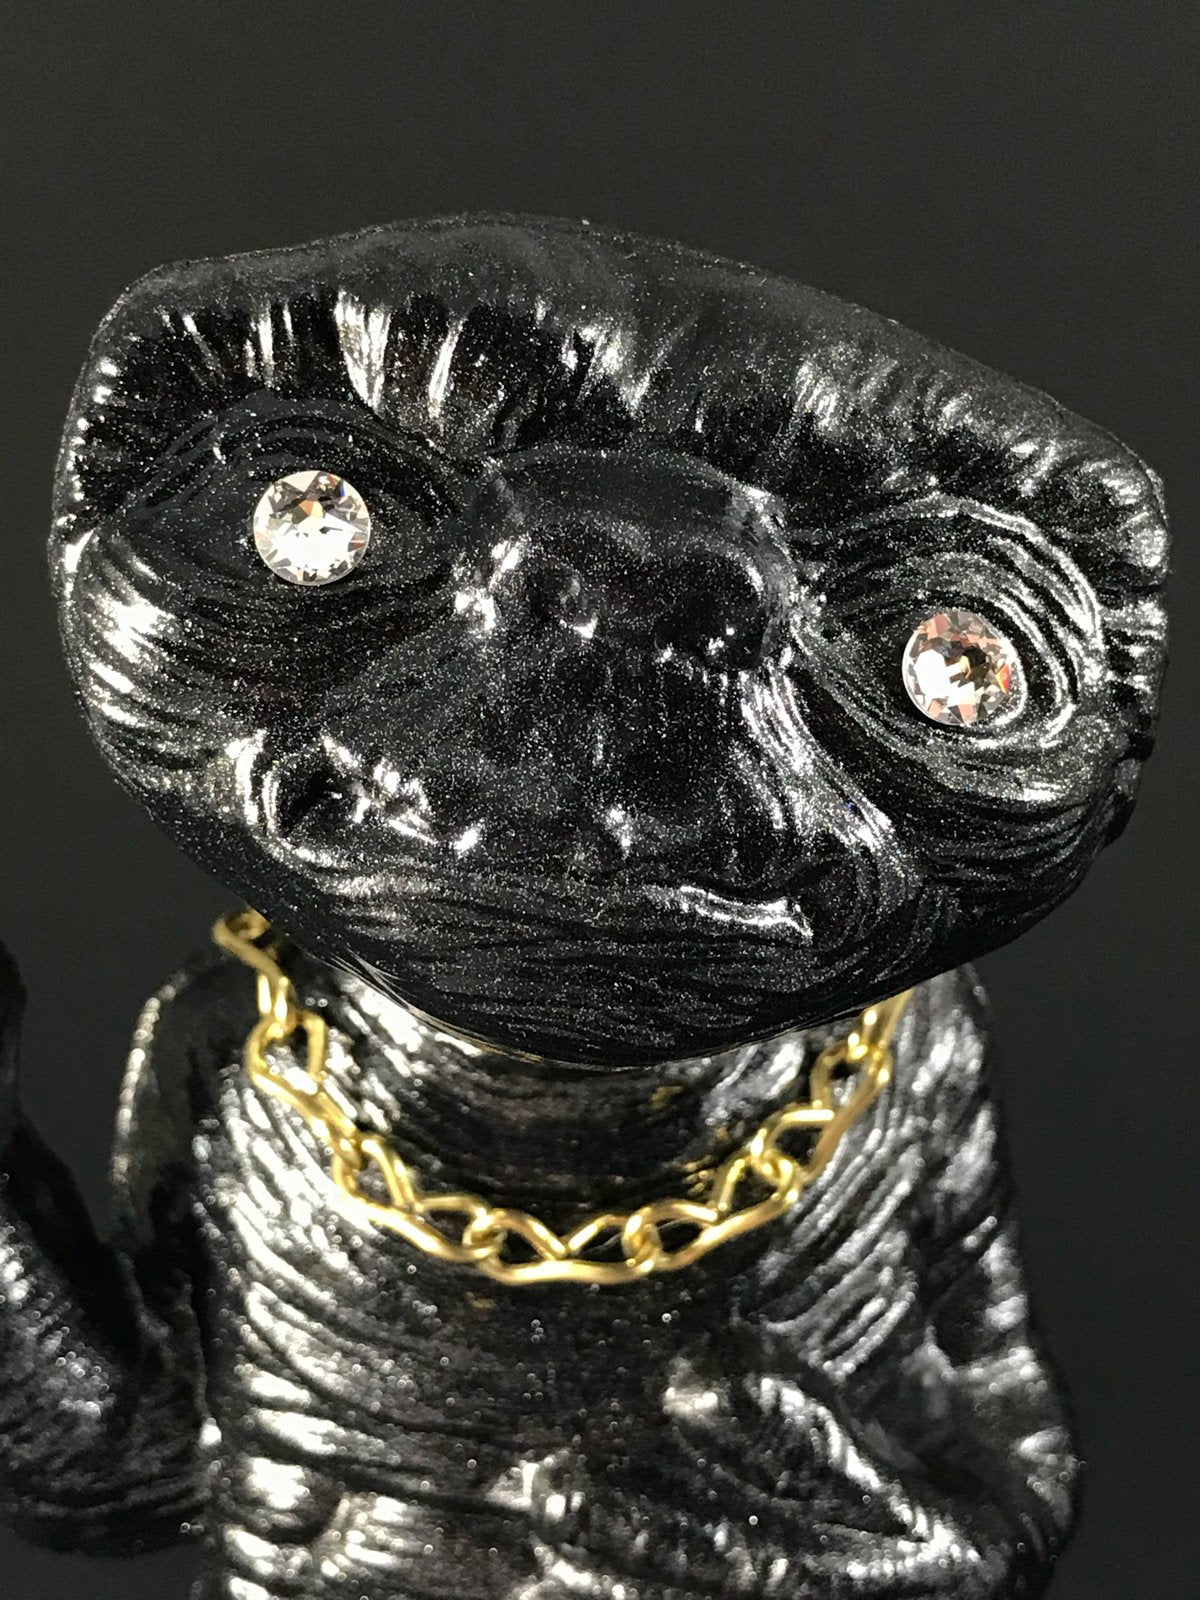 Black ET with rhinestone eyes, gold chain and metal flake